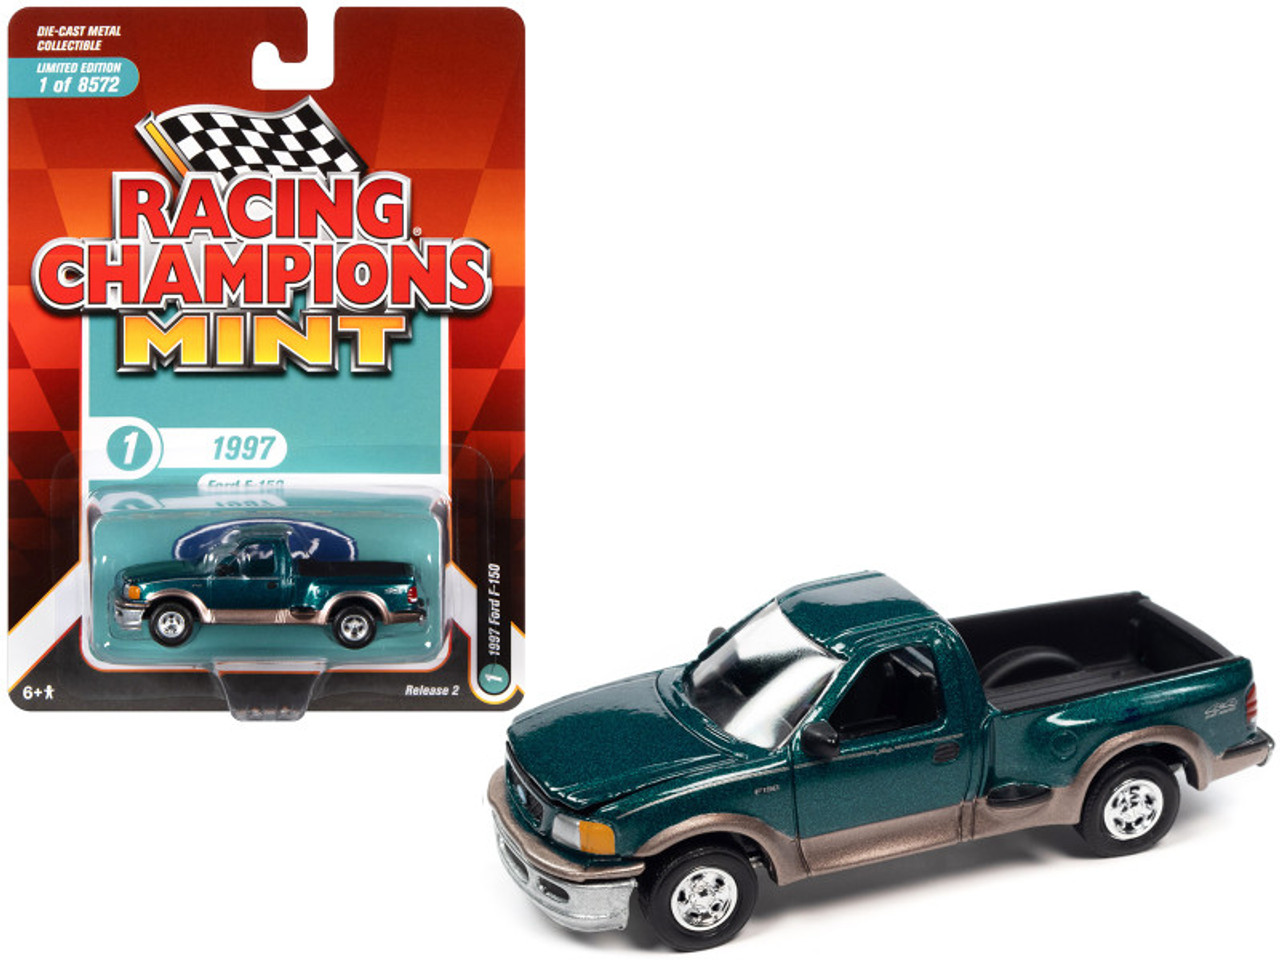 1997 Ford F-150 Pickup Truck Green Metallic and Beige "Racing Champions Mint 2022" Release 2 Limited Edition to 8572 pieces Worldwide 1/64 Diecast Model Car by Racing Champions